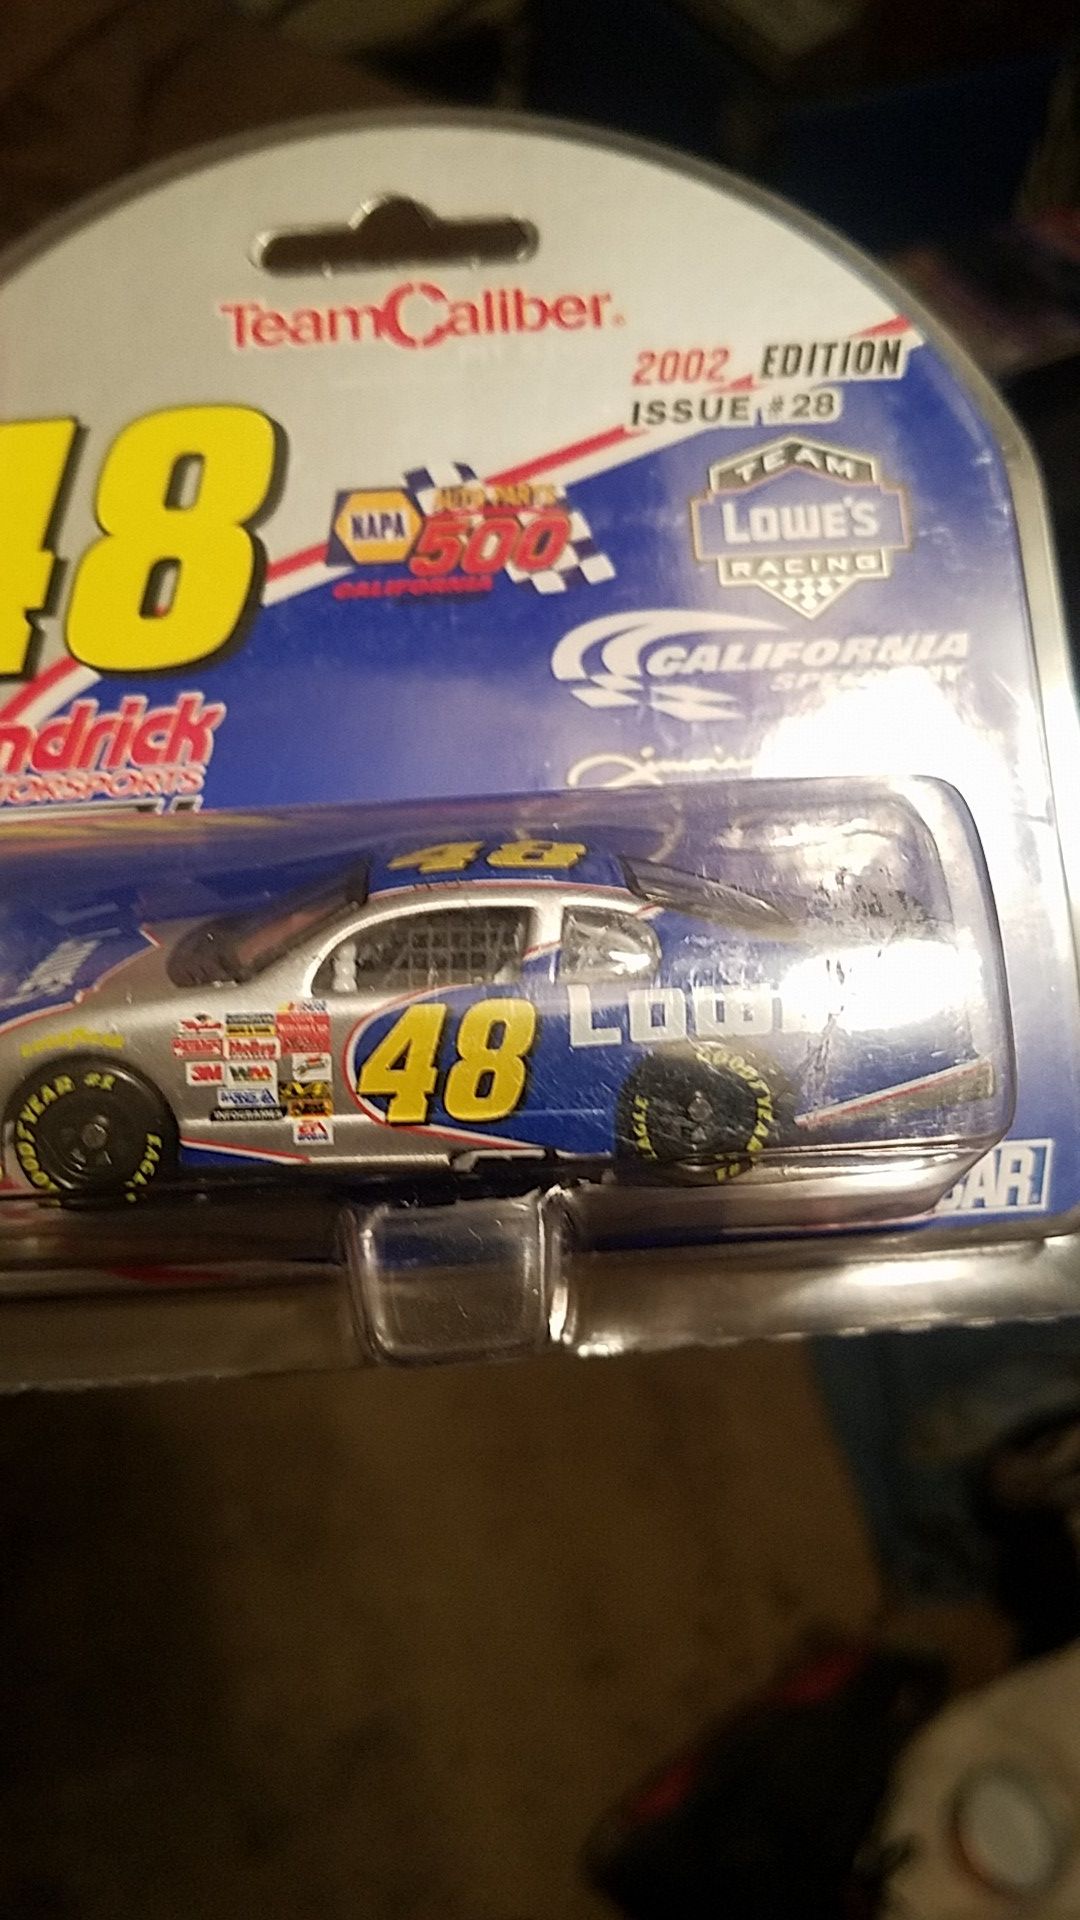 NASCAR's Jimmie Johnson number 48 collectible car